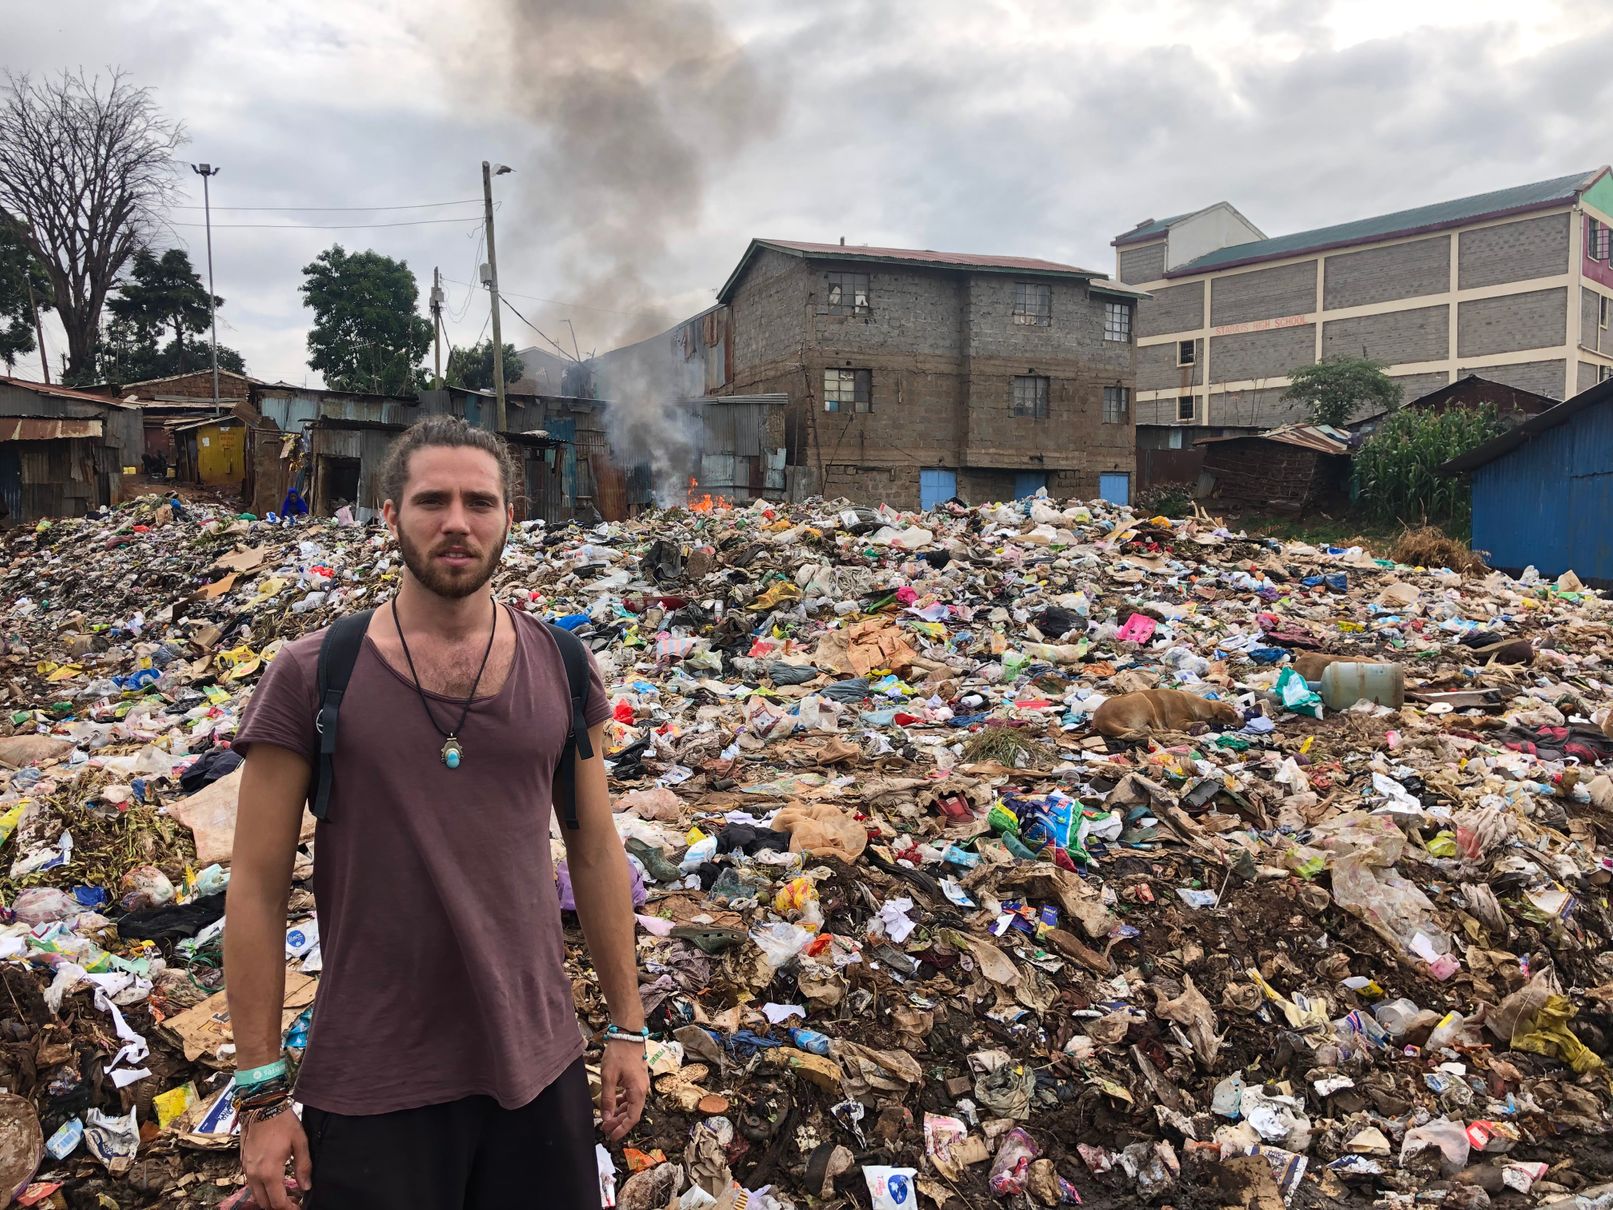 me at a rubbish dump with houses in the back